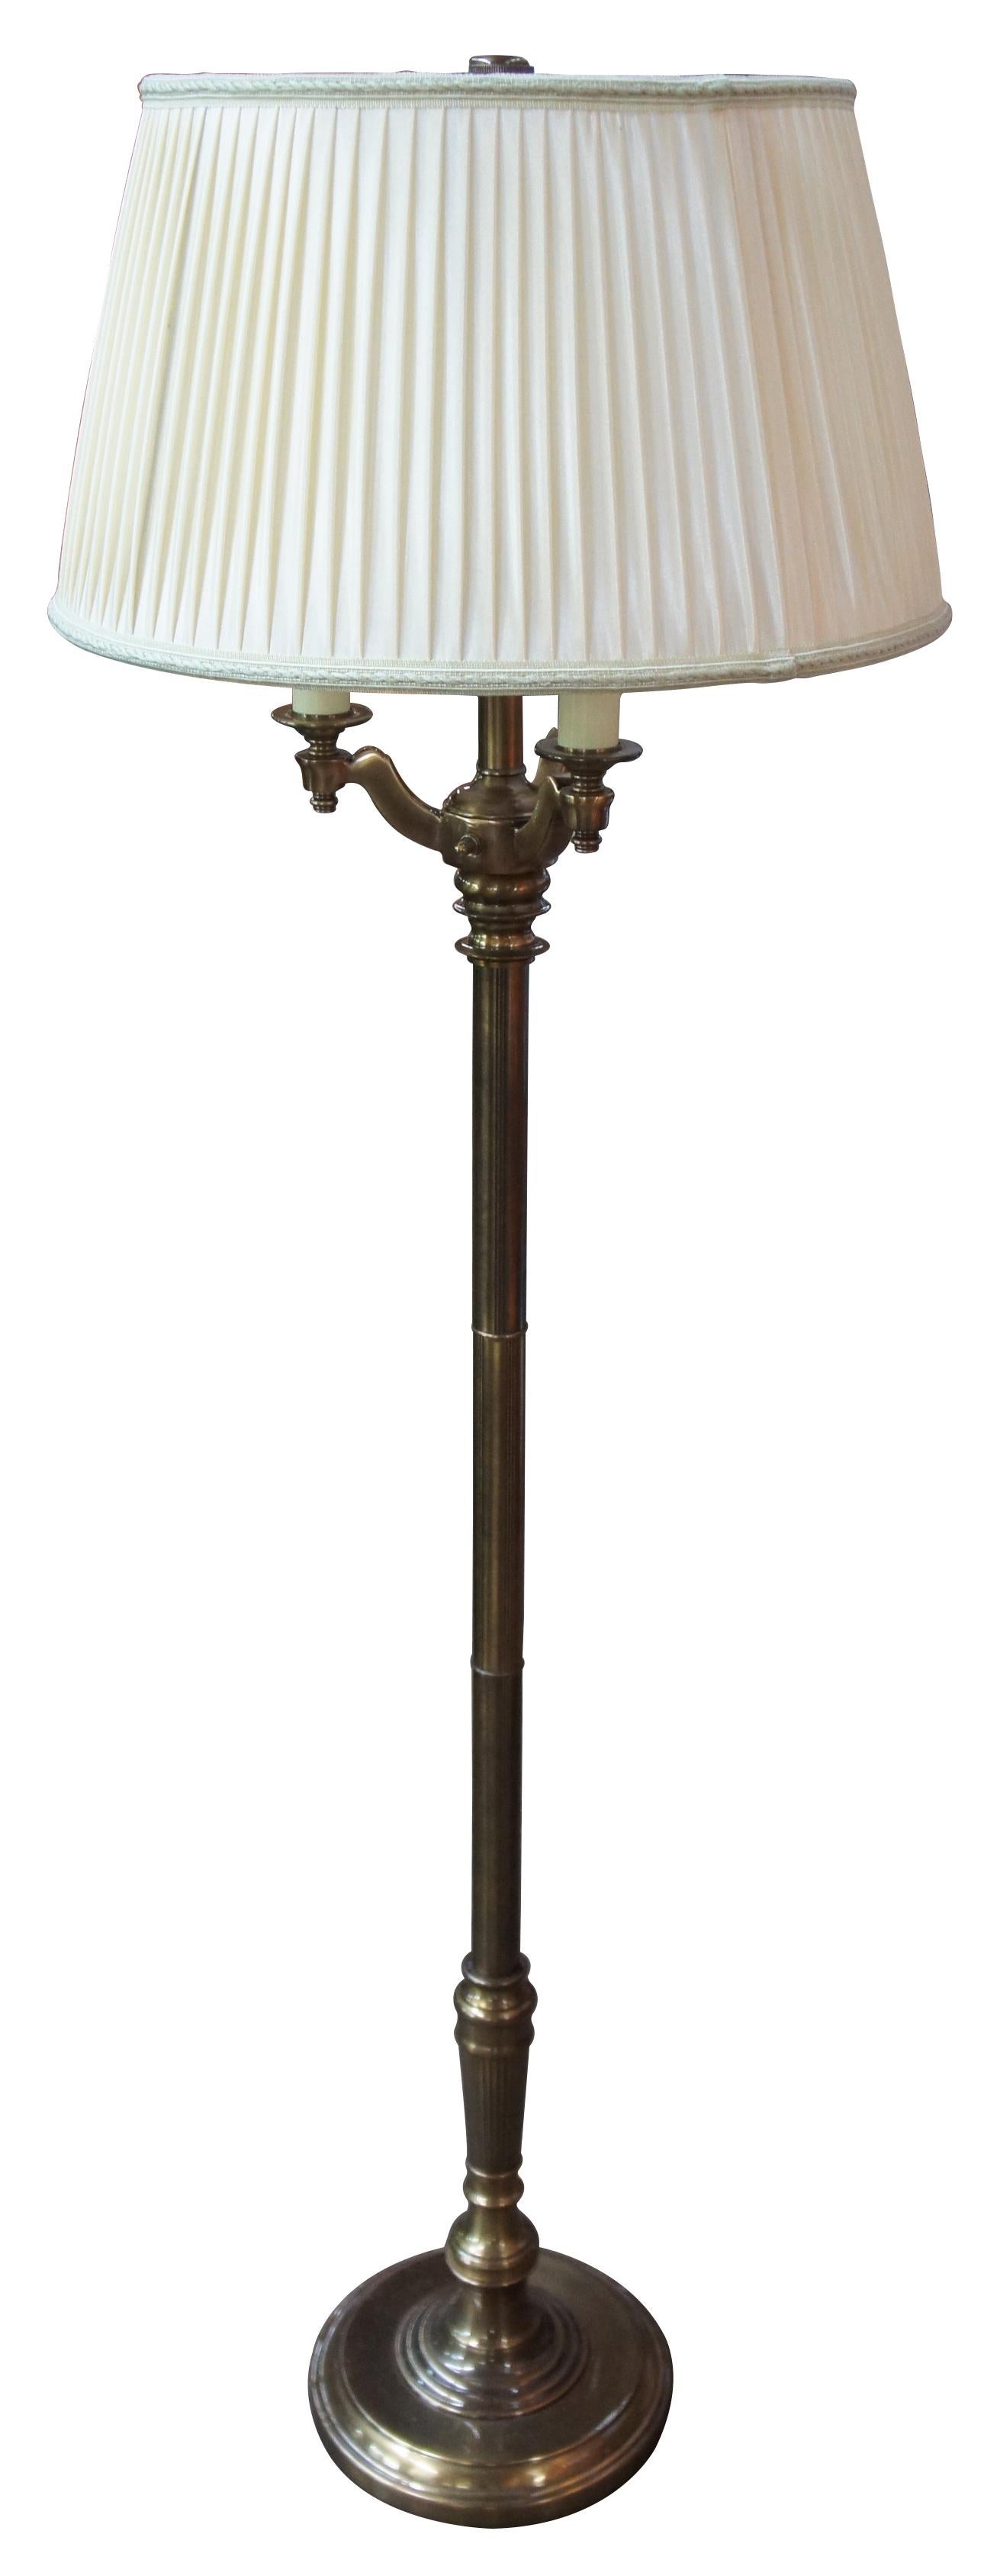 Vintage Stiffel mogul candelabra floor lamp in brass finish with three torchiere style candlestick lights and a central light with cream Stiffel shade.

shade- 19